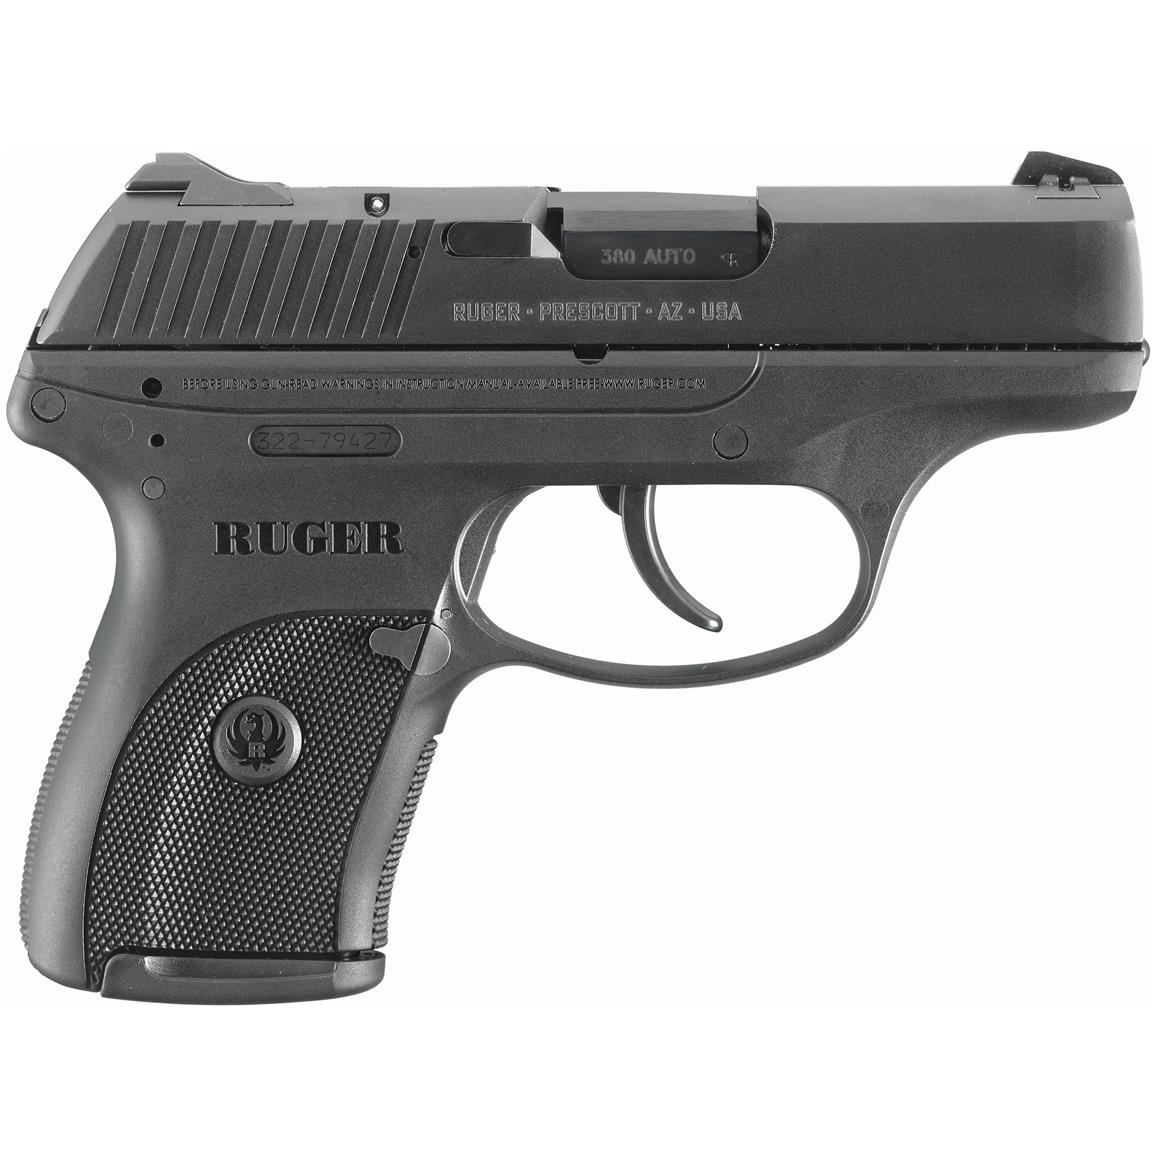 ruger-lc380-pistol-semi-automatic-380-acp-3-12-barrel-7-1-rounds